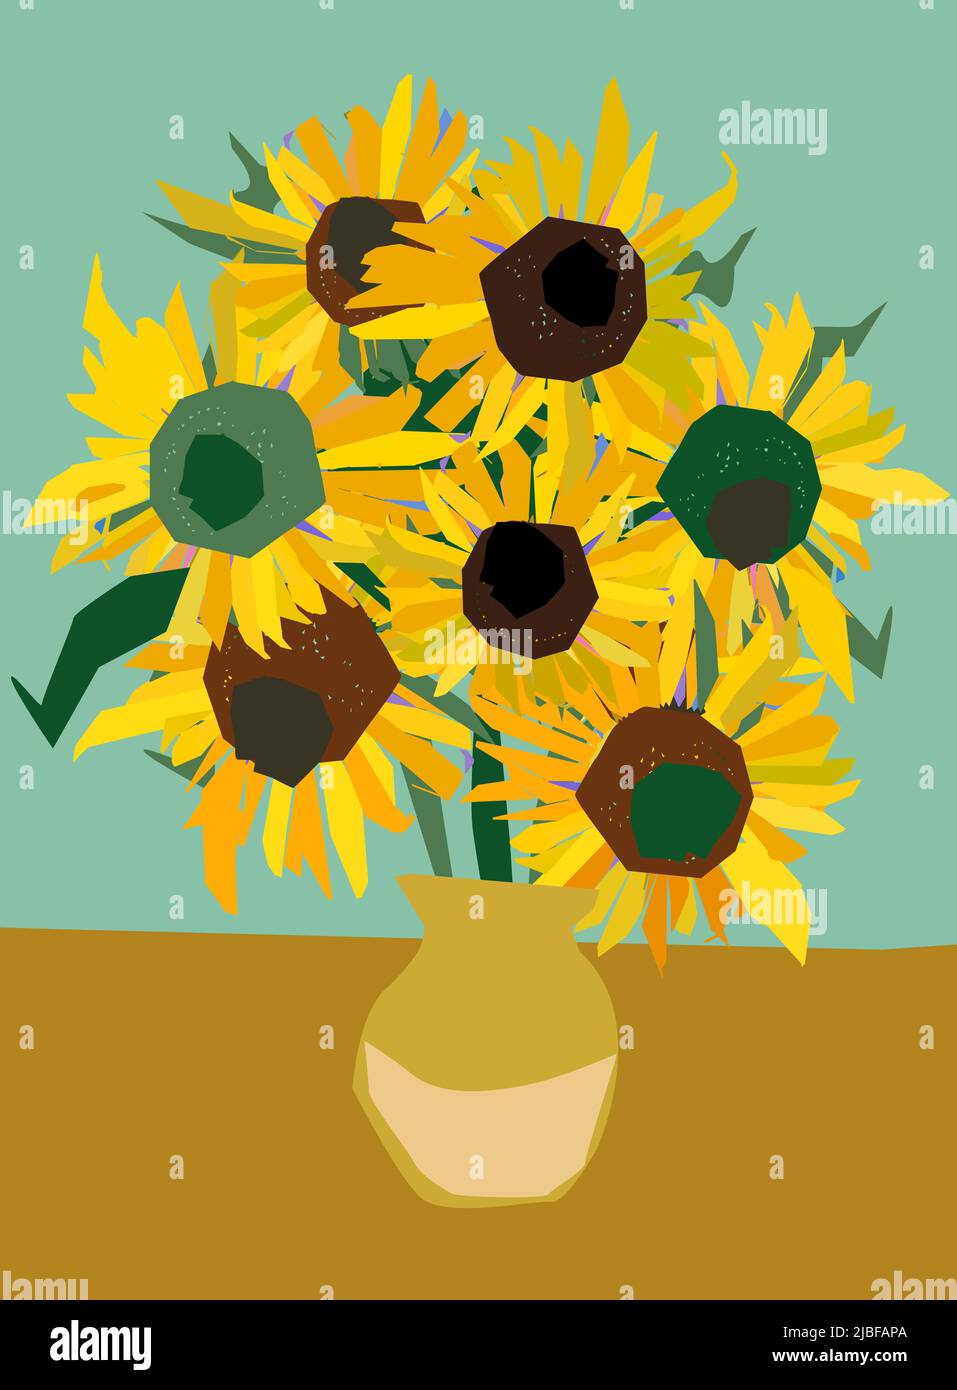 Hand drawn sunflowers greeting cards. Sunflowers of Van Gogh, vector illustration Stock Vector